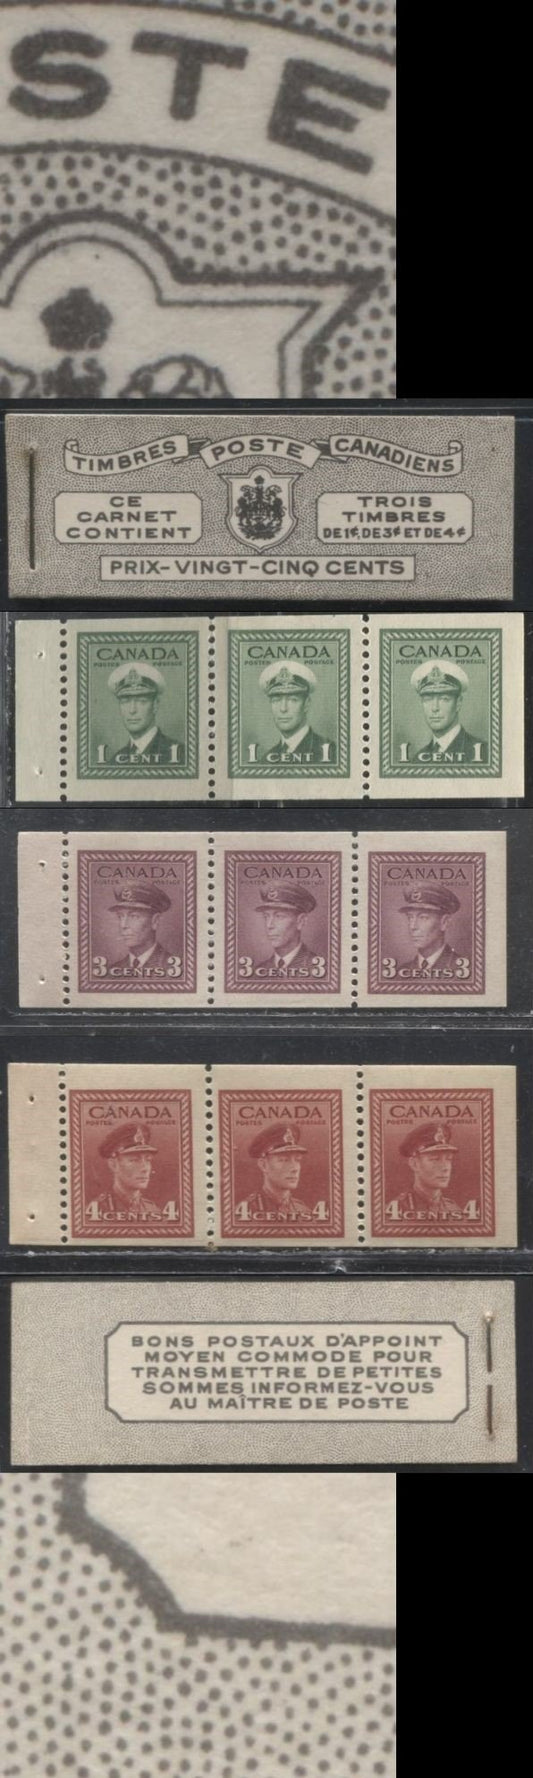 Lot 198 Canada #BK38a 1942-1949 War Issue Complete 25c, French Booklet Containing 1 Pane Each of 3 of 1c Green, 3c Rosy Plum and 4c Carmine Red, Harris Front Cover Type Vb , Back Cover Jvi, 7c & 6c Rate Page